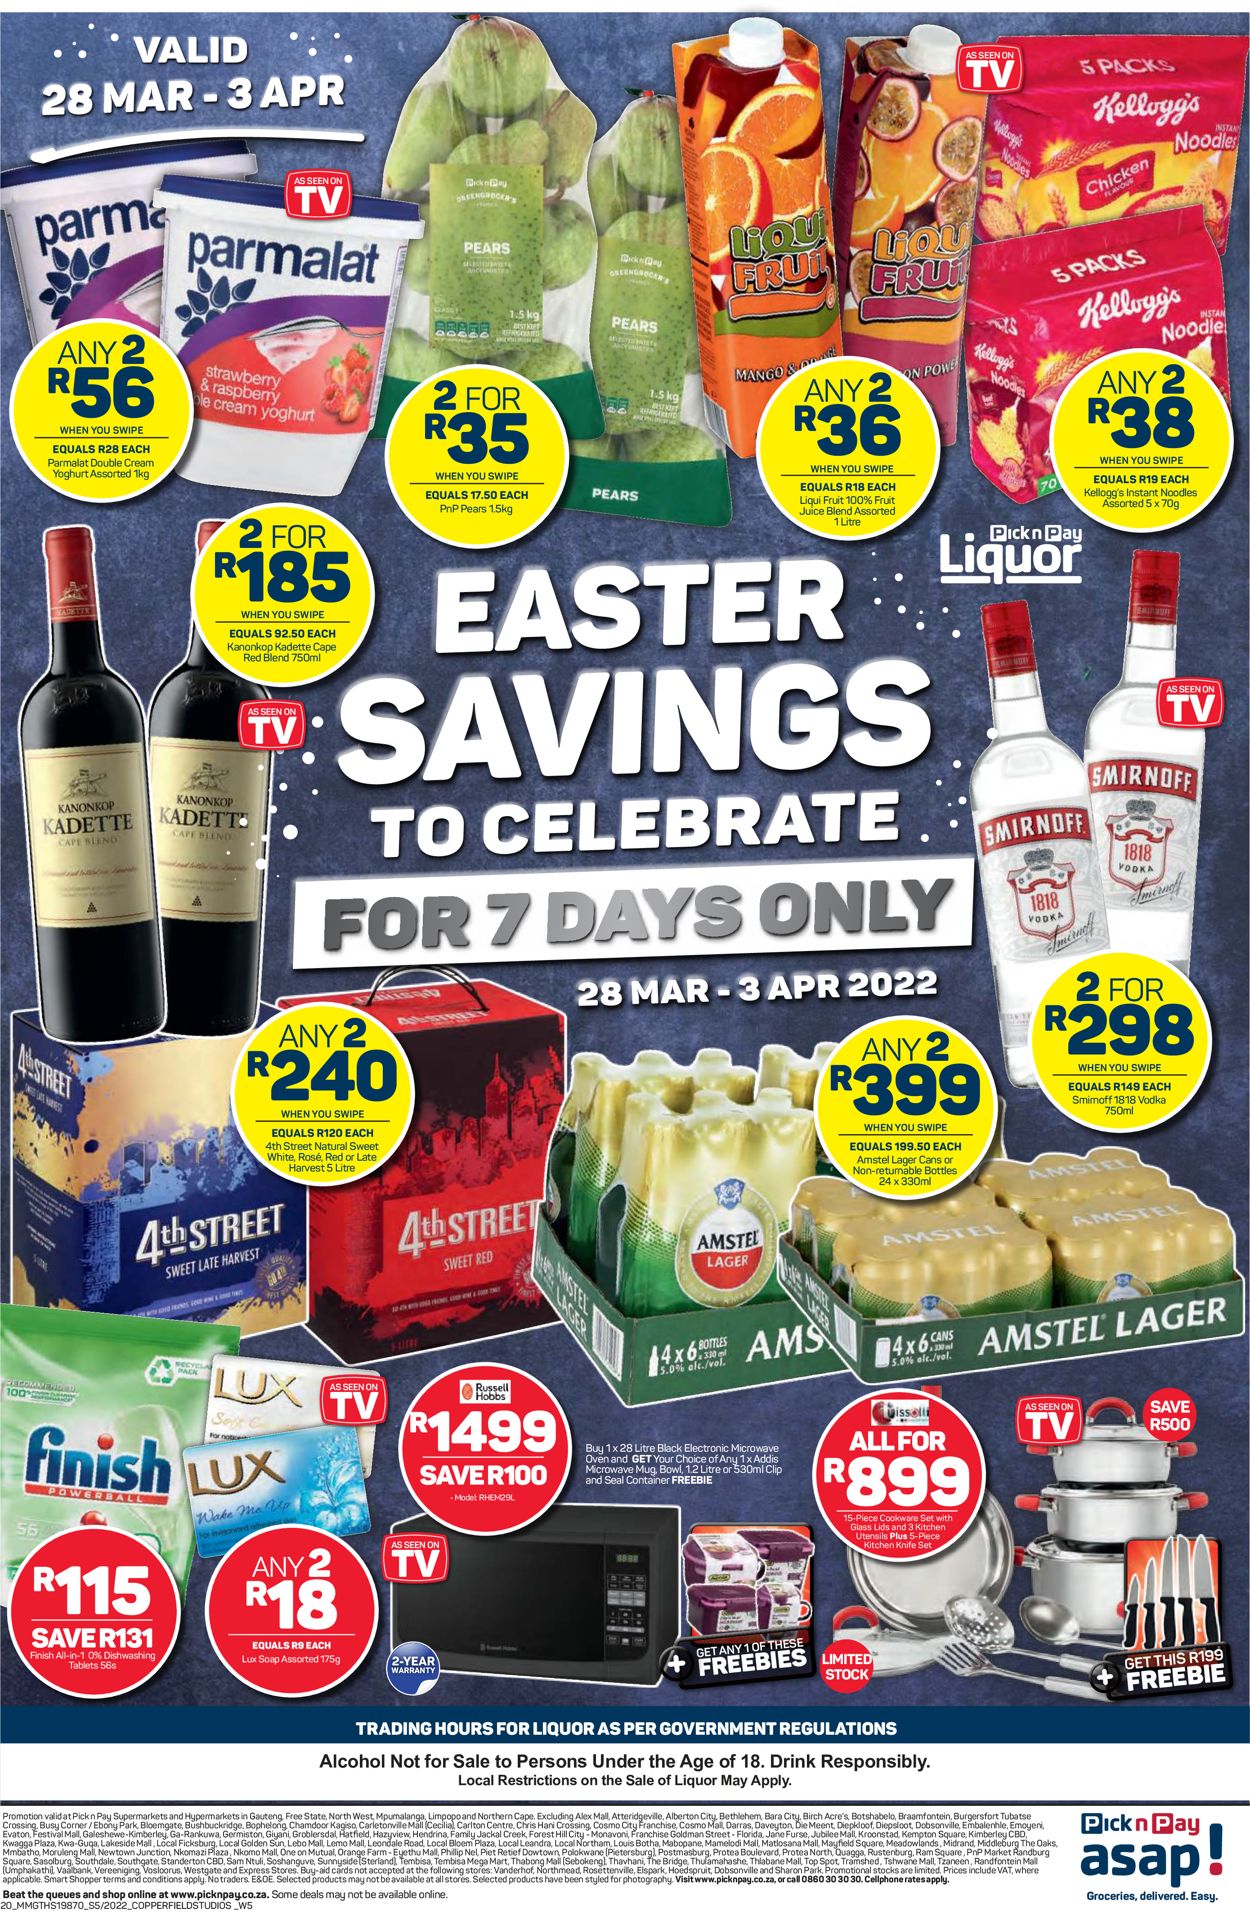 Pick n Pay, Specials & Catalogues - Easter